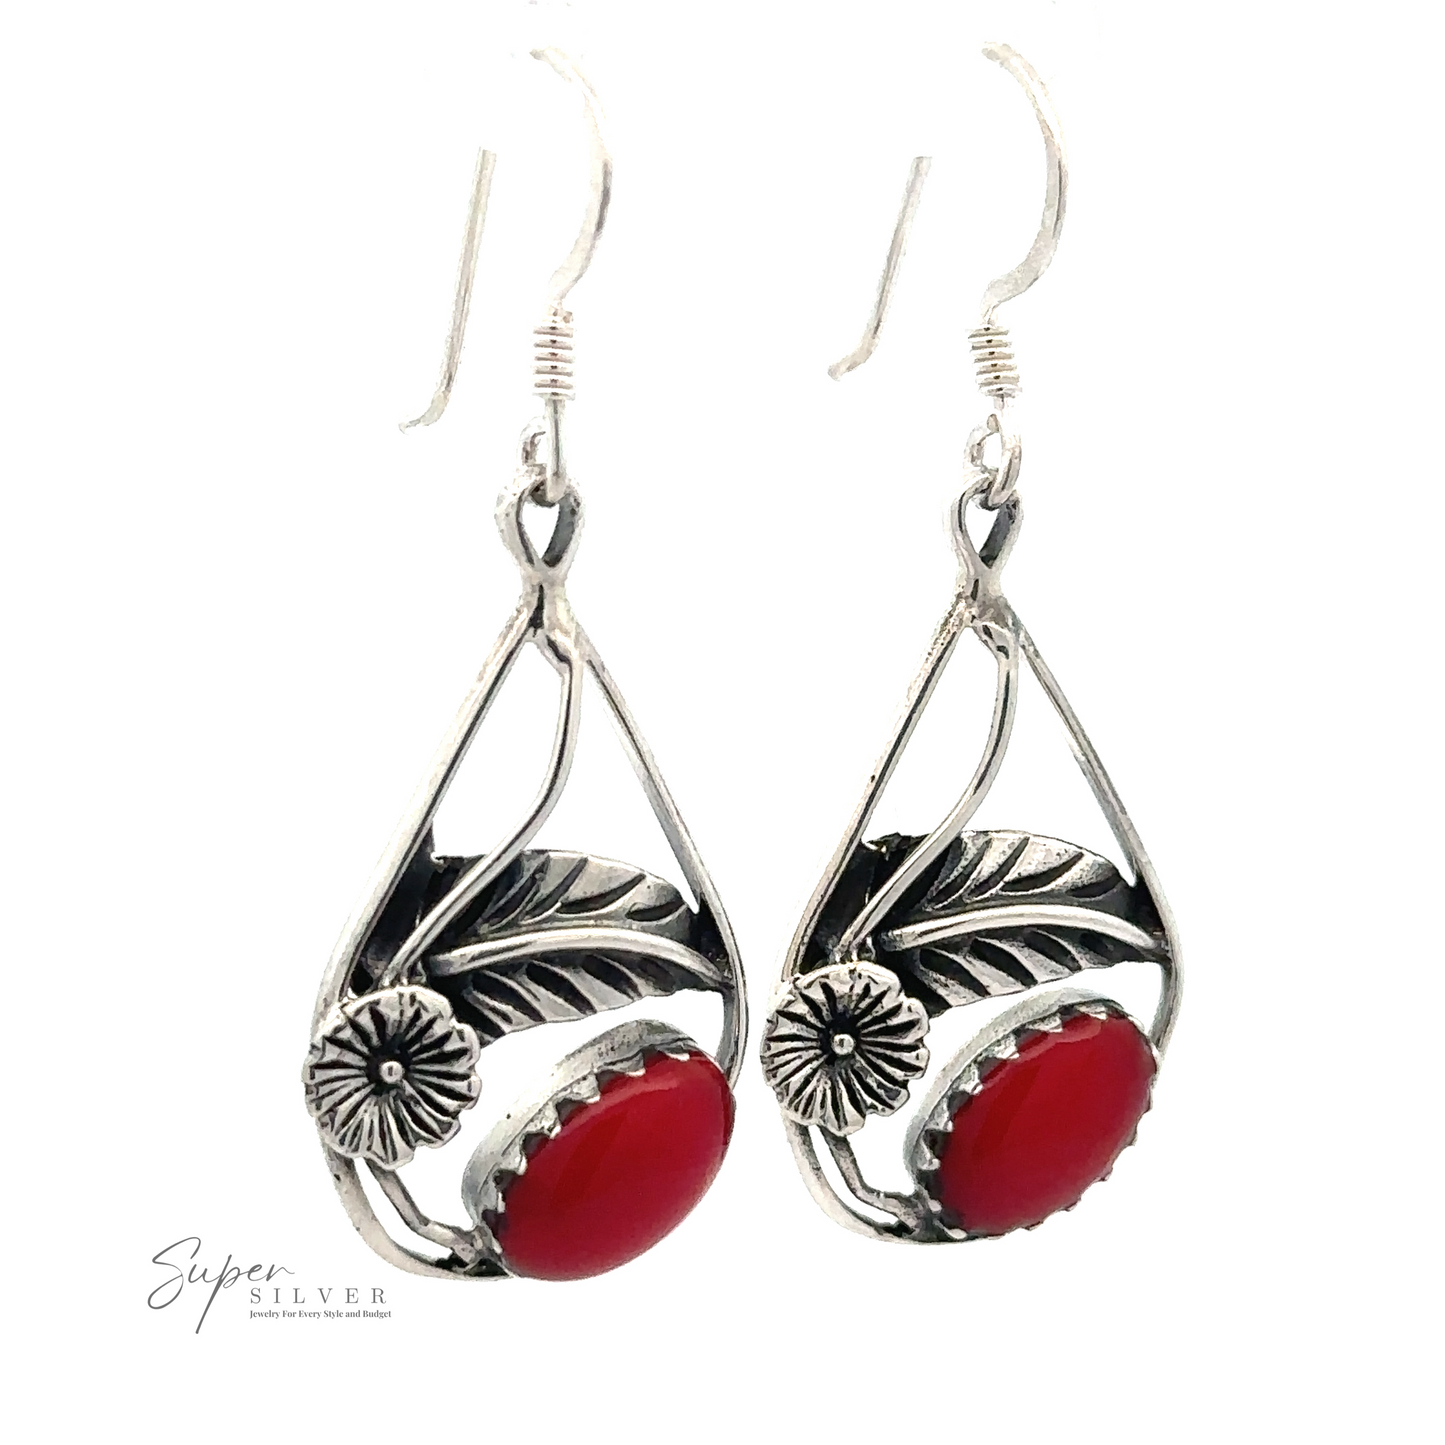 
                  
                    A pair of Inlaid Teardrop Earrings With Floral Setting with red oval stones, leaf and flower motifs, and hook backs. The logo "Super Silver" is displayed in the corner.
                  
                